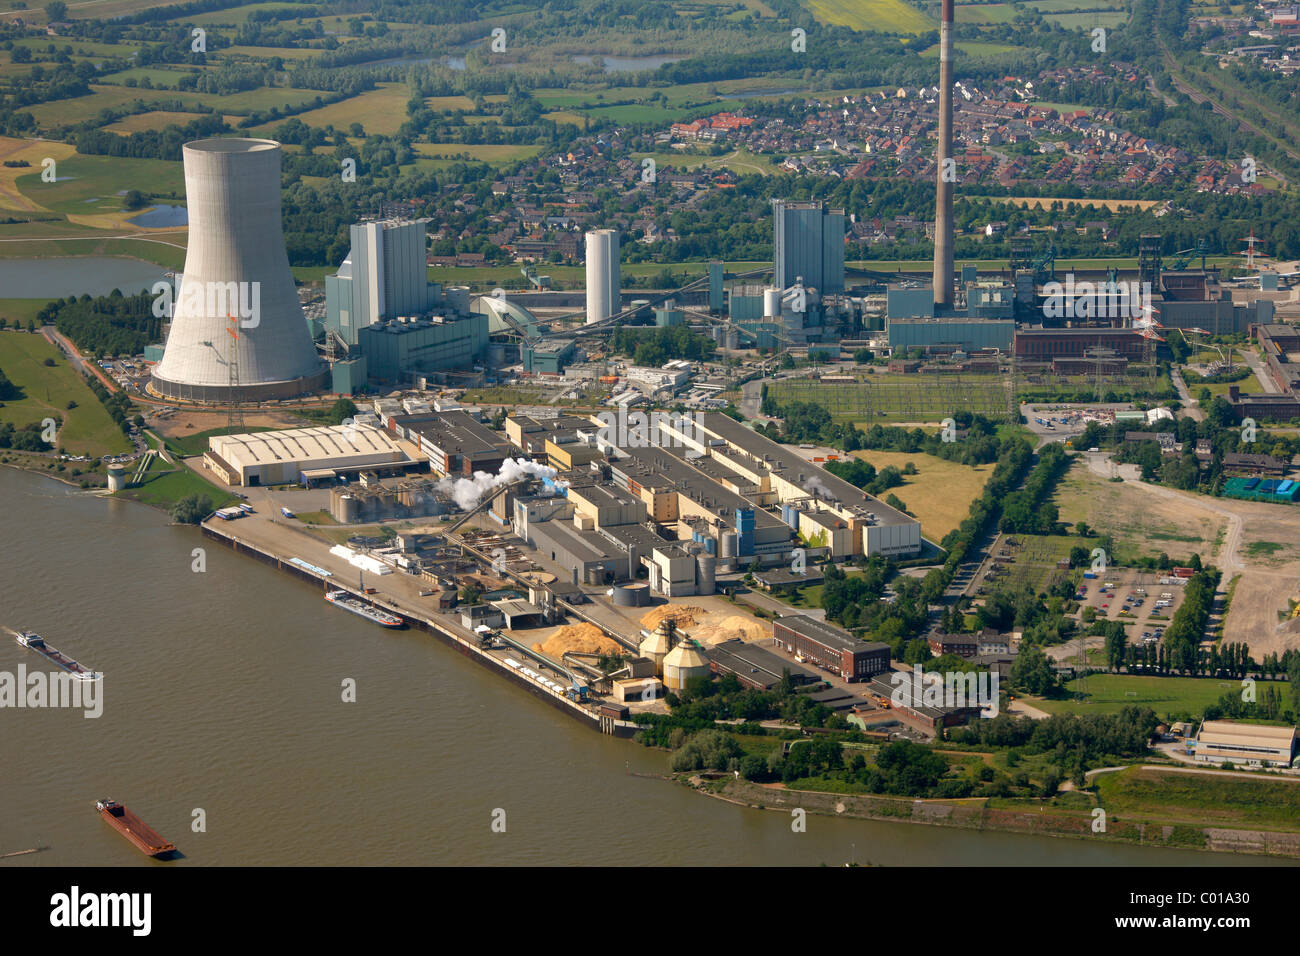 Aerial photo, new power plant, coal power plant of Evonik Steag, Duisburg Walsum, formerly Walsum coal mine, Norske Skog plant Stock Photo